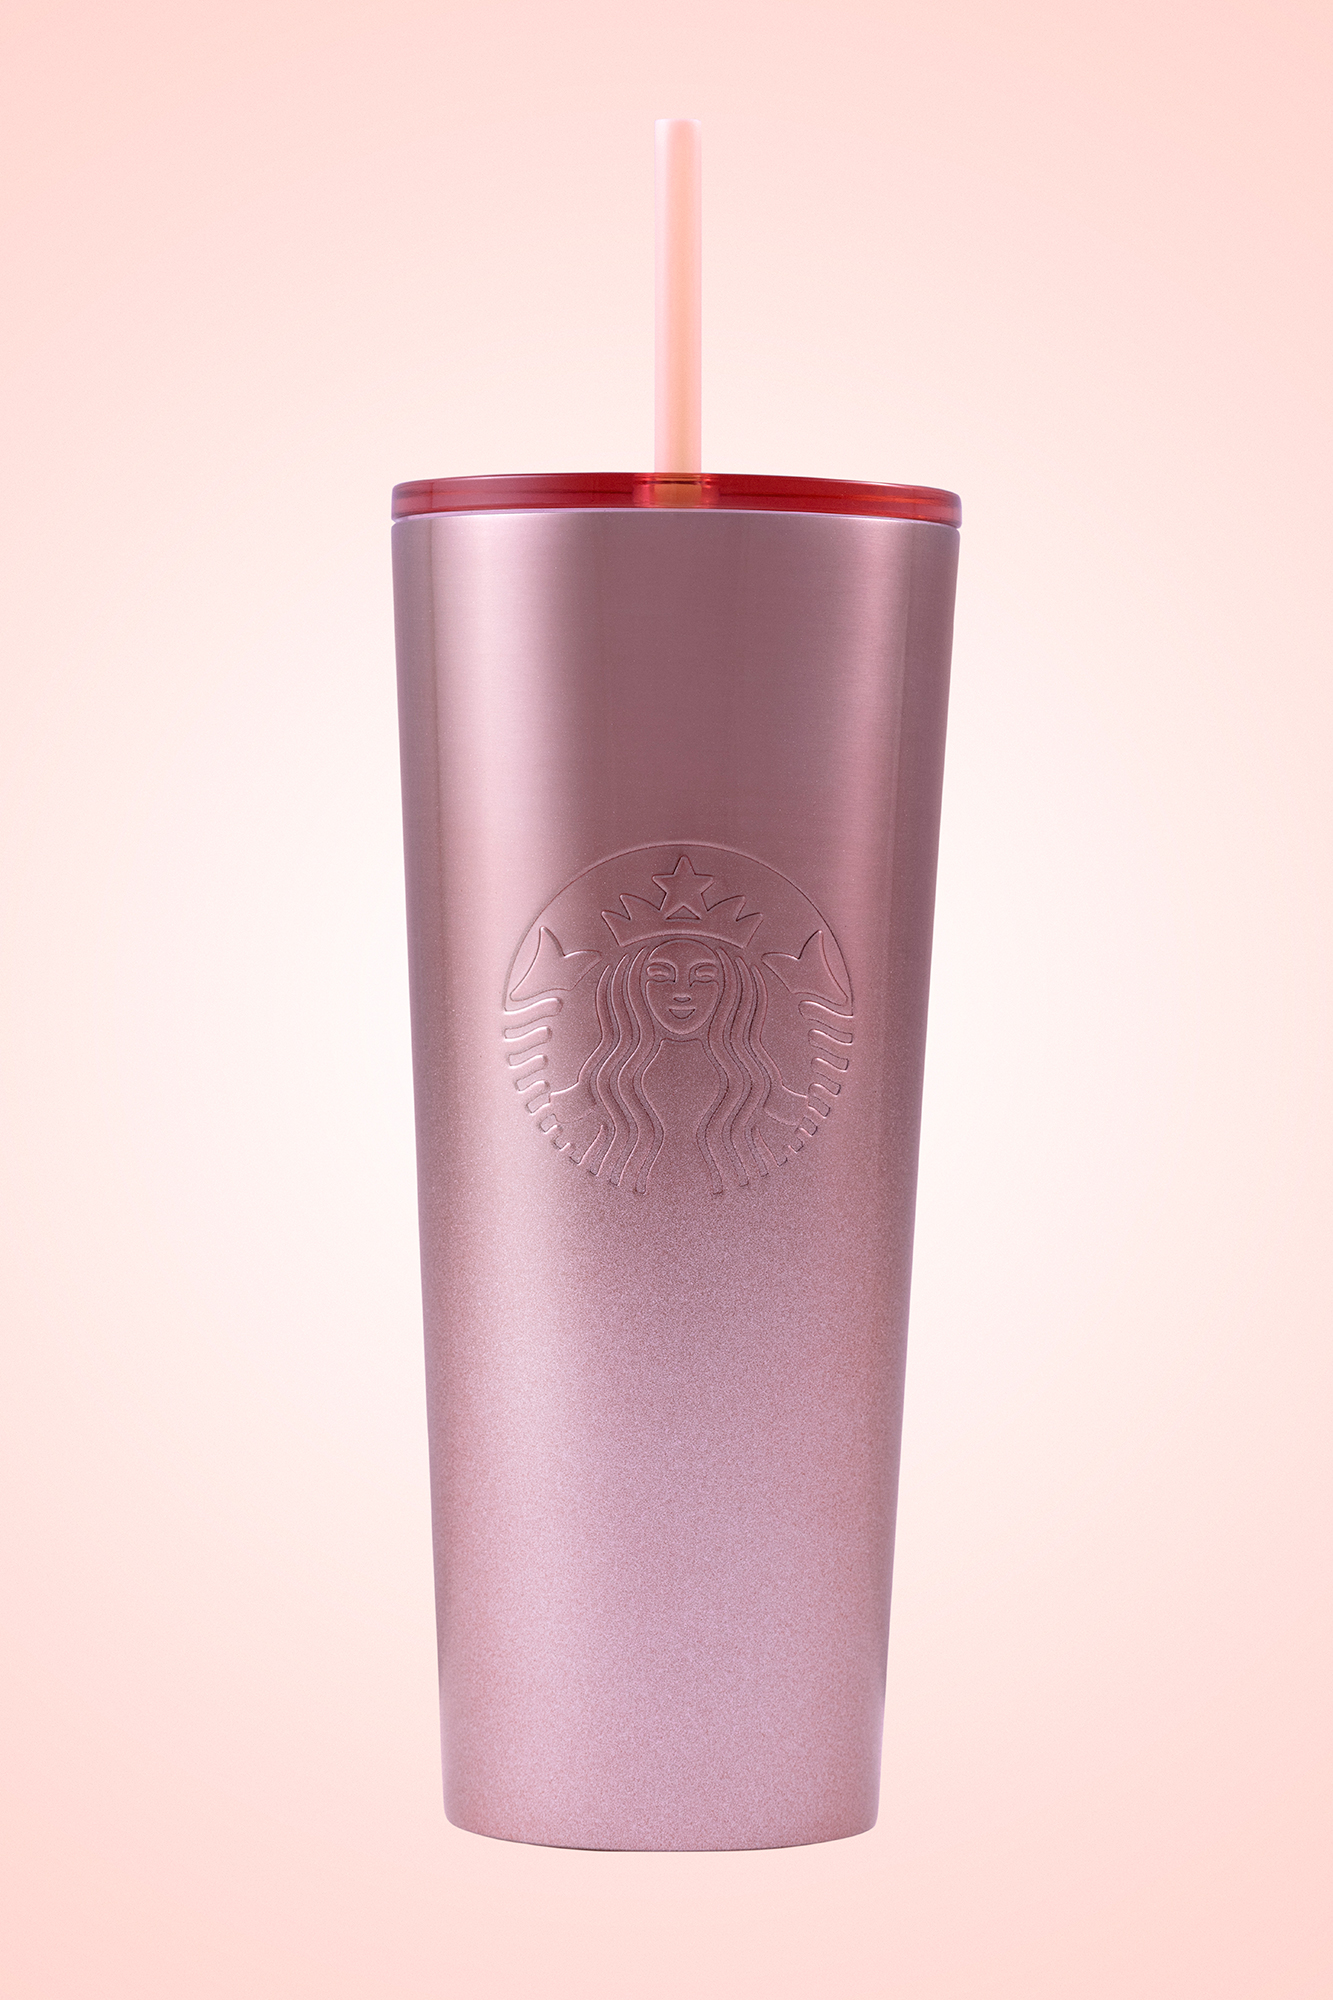 https://www.usmagazine.com/wp-content/uploads/2019/09/Starbucks-Unveils-New-Holiday-Cup-Lineup-05.jpg?quality=86&strip=all